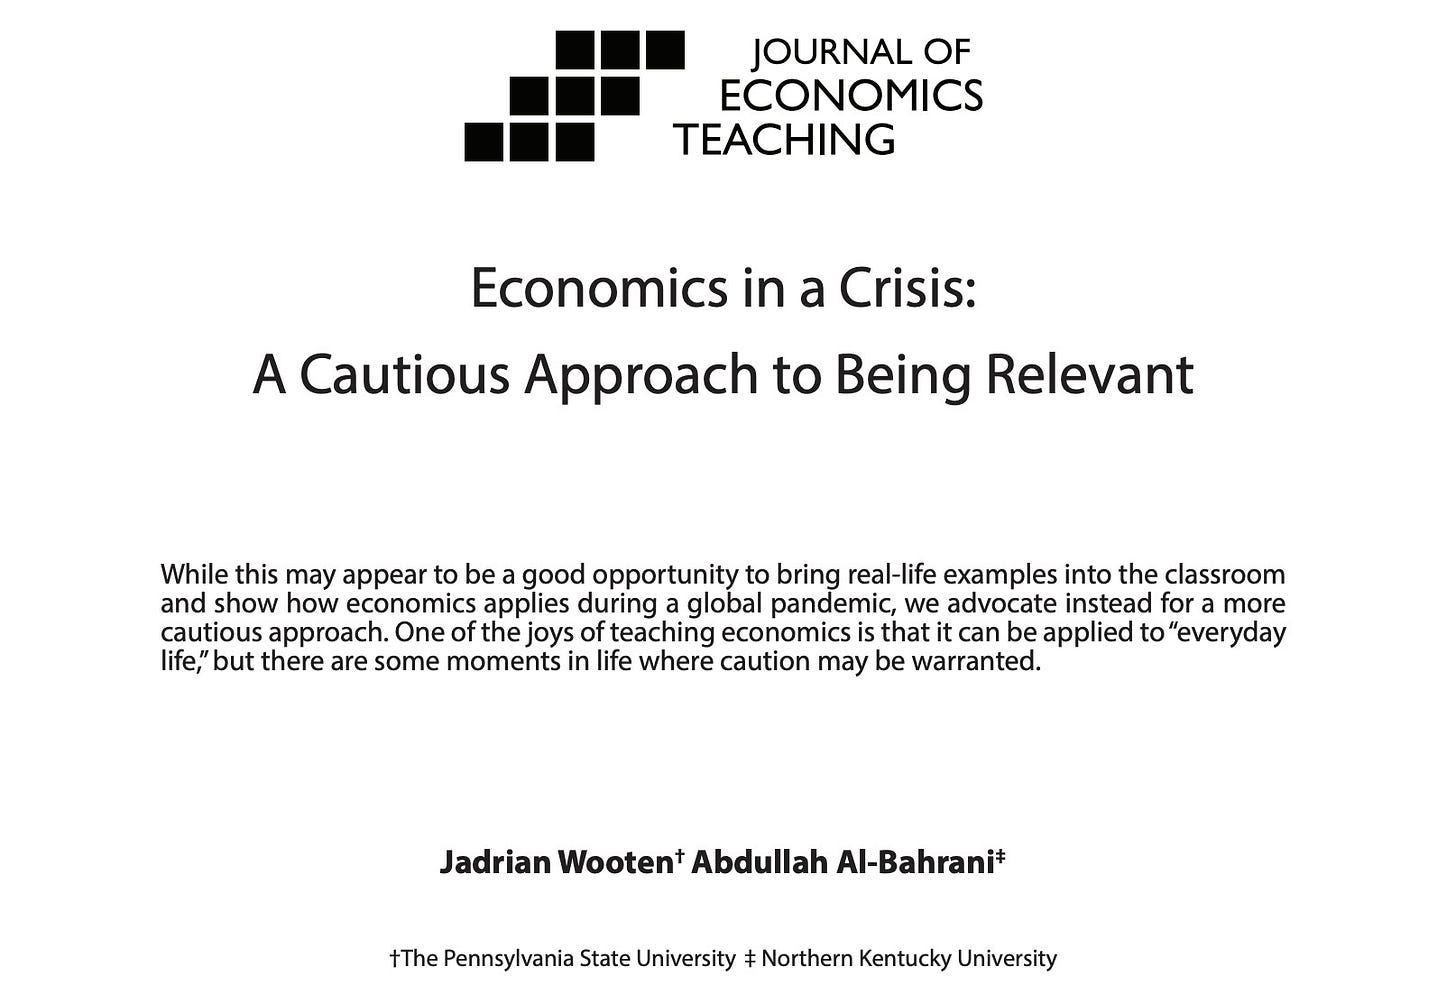 A screenshot of a paper titled "Economics in a Crisis: A Cautious Approach to Being Relevant" published in the Journal of Economics Teaching.